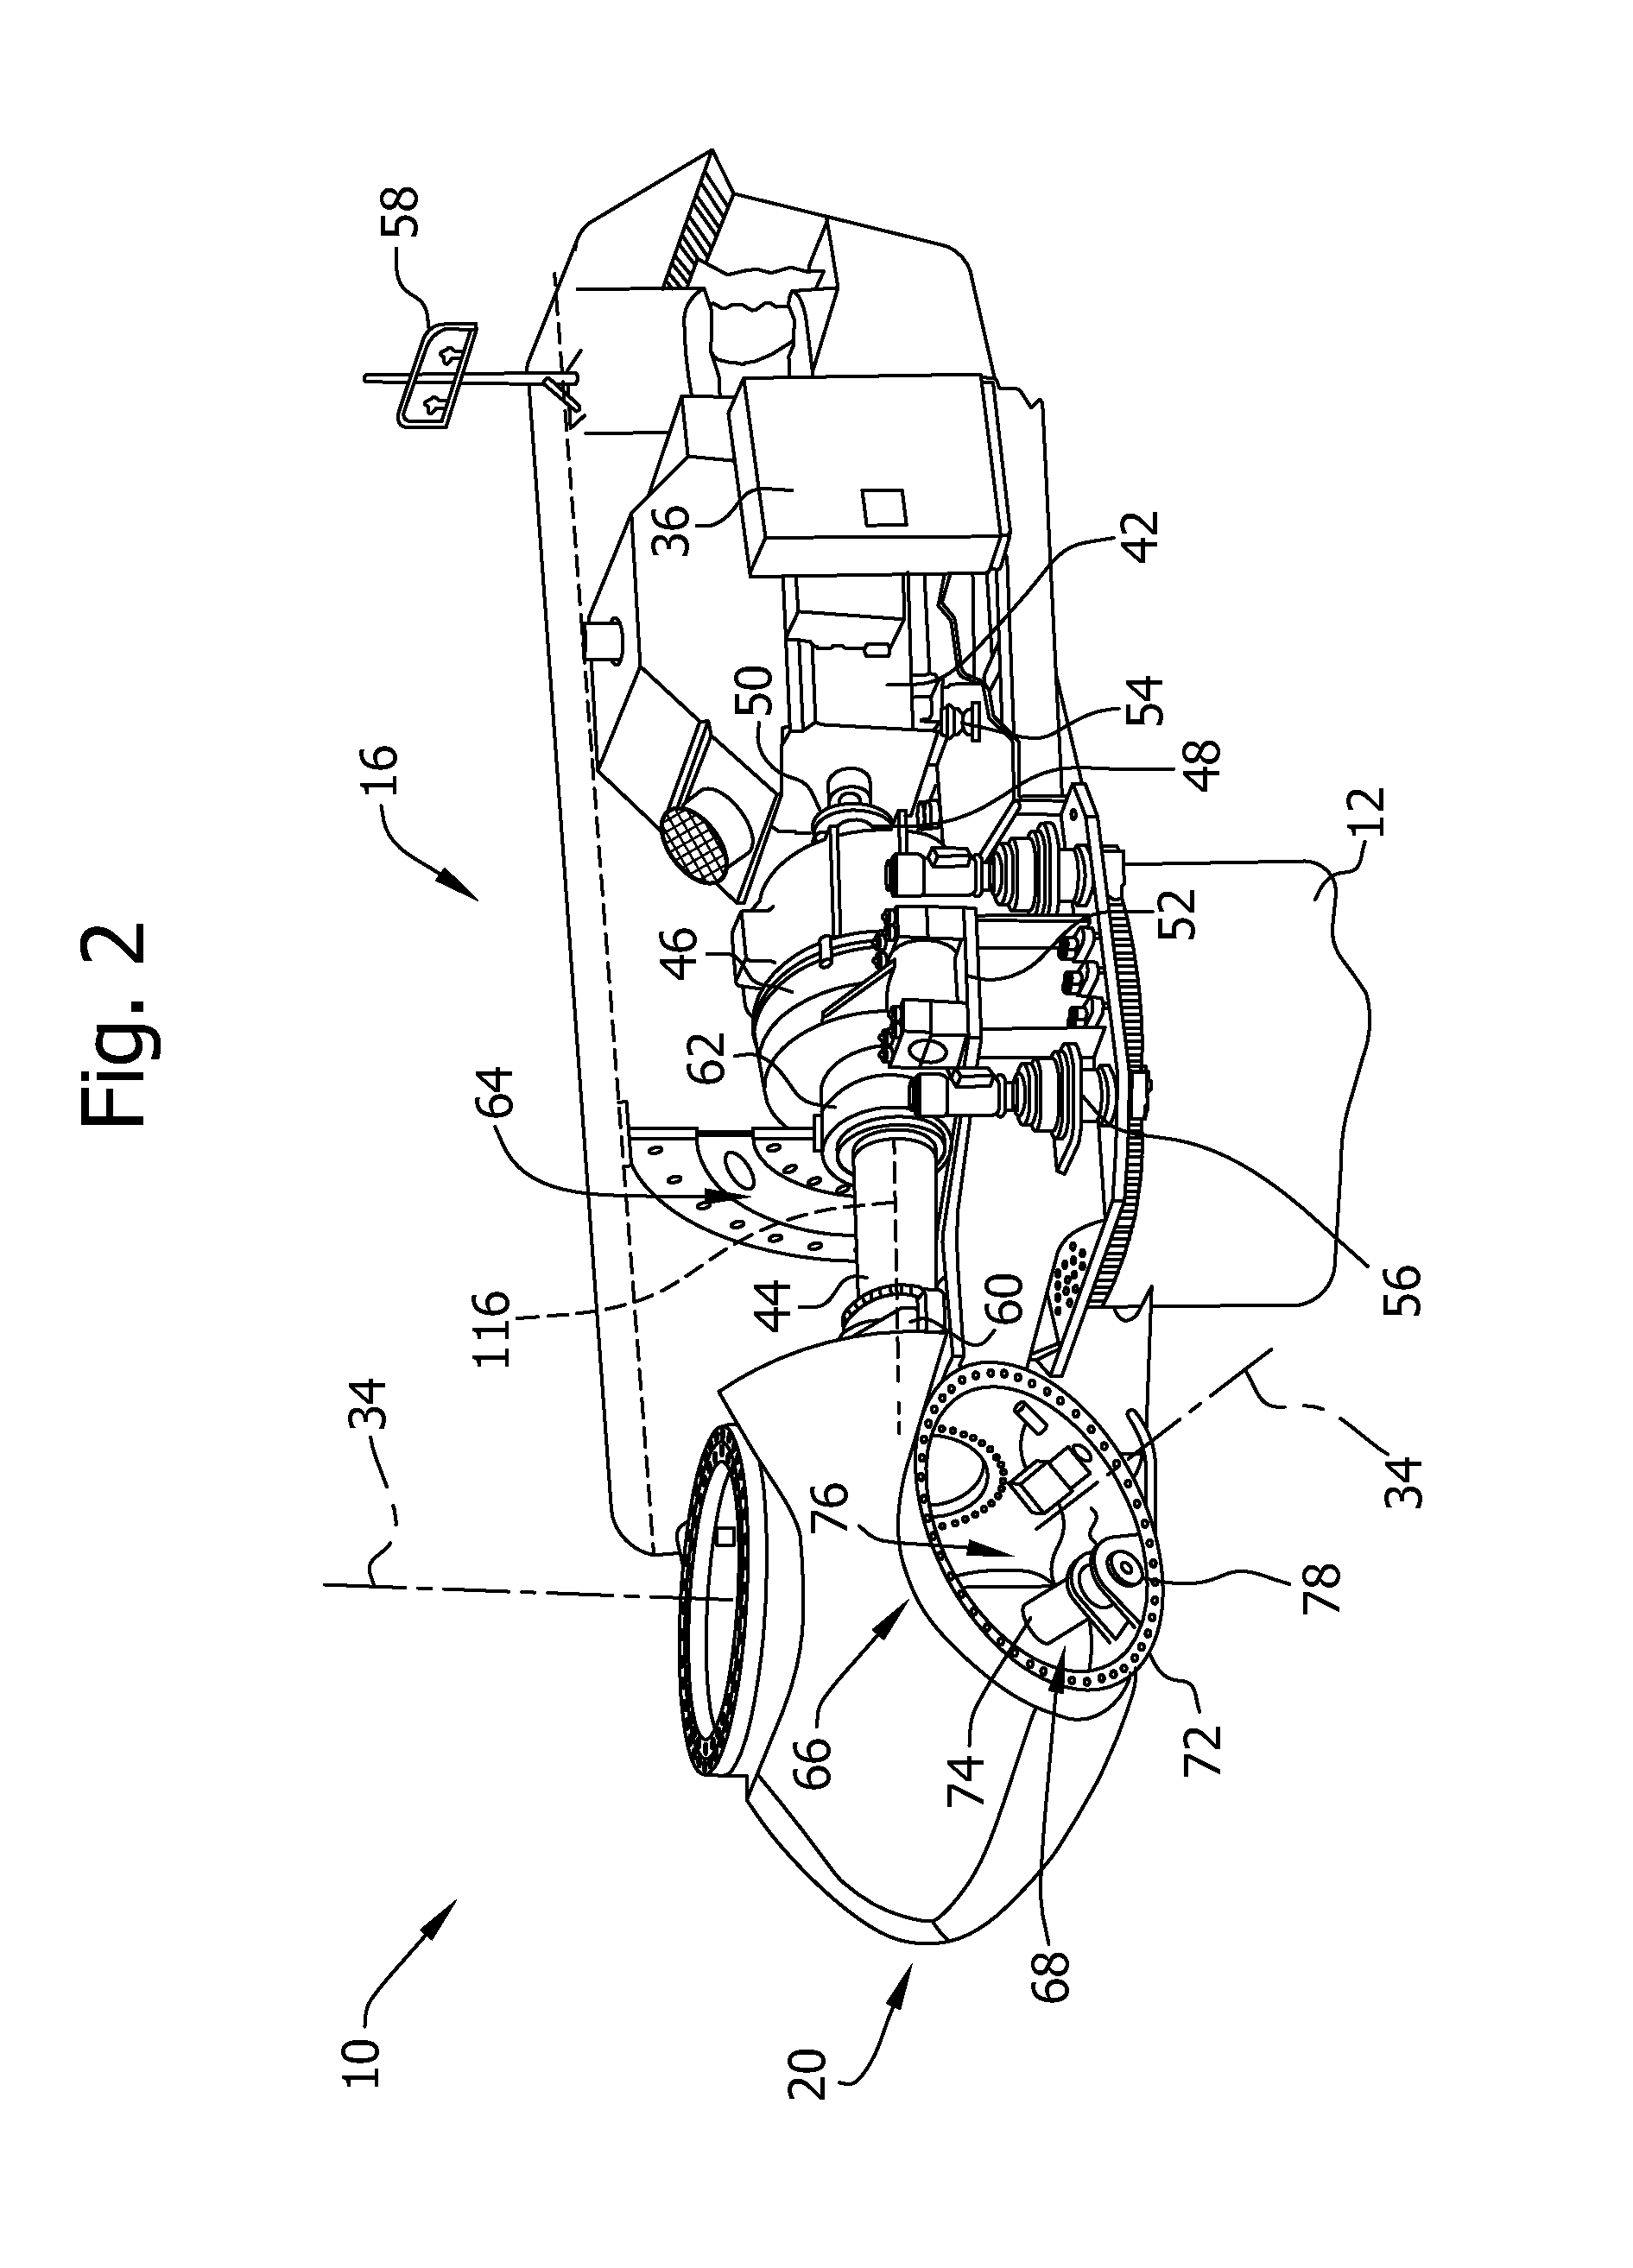 Methods and systems for operating a wind turbine in noise reduced operation modes